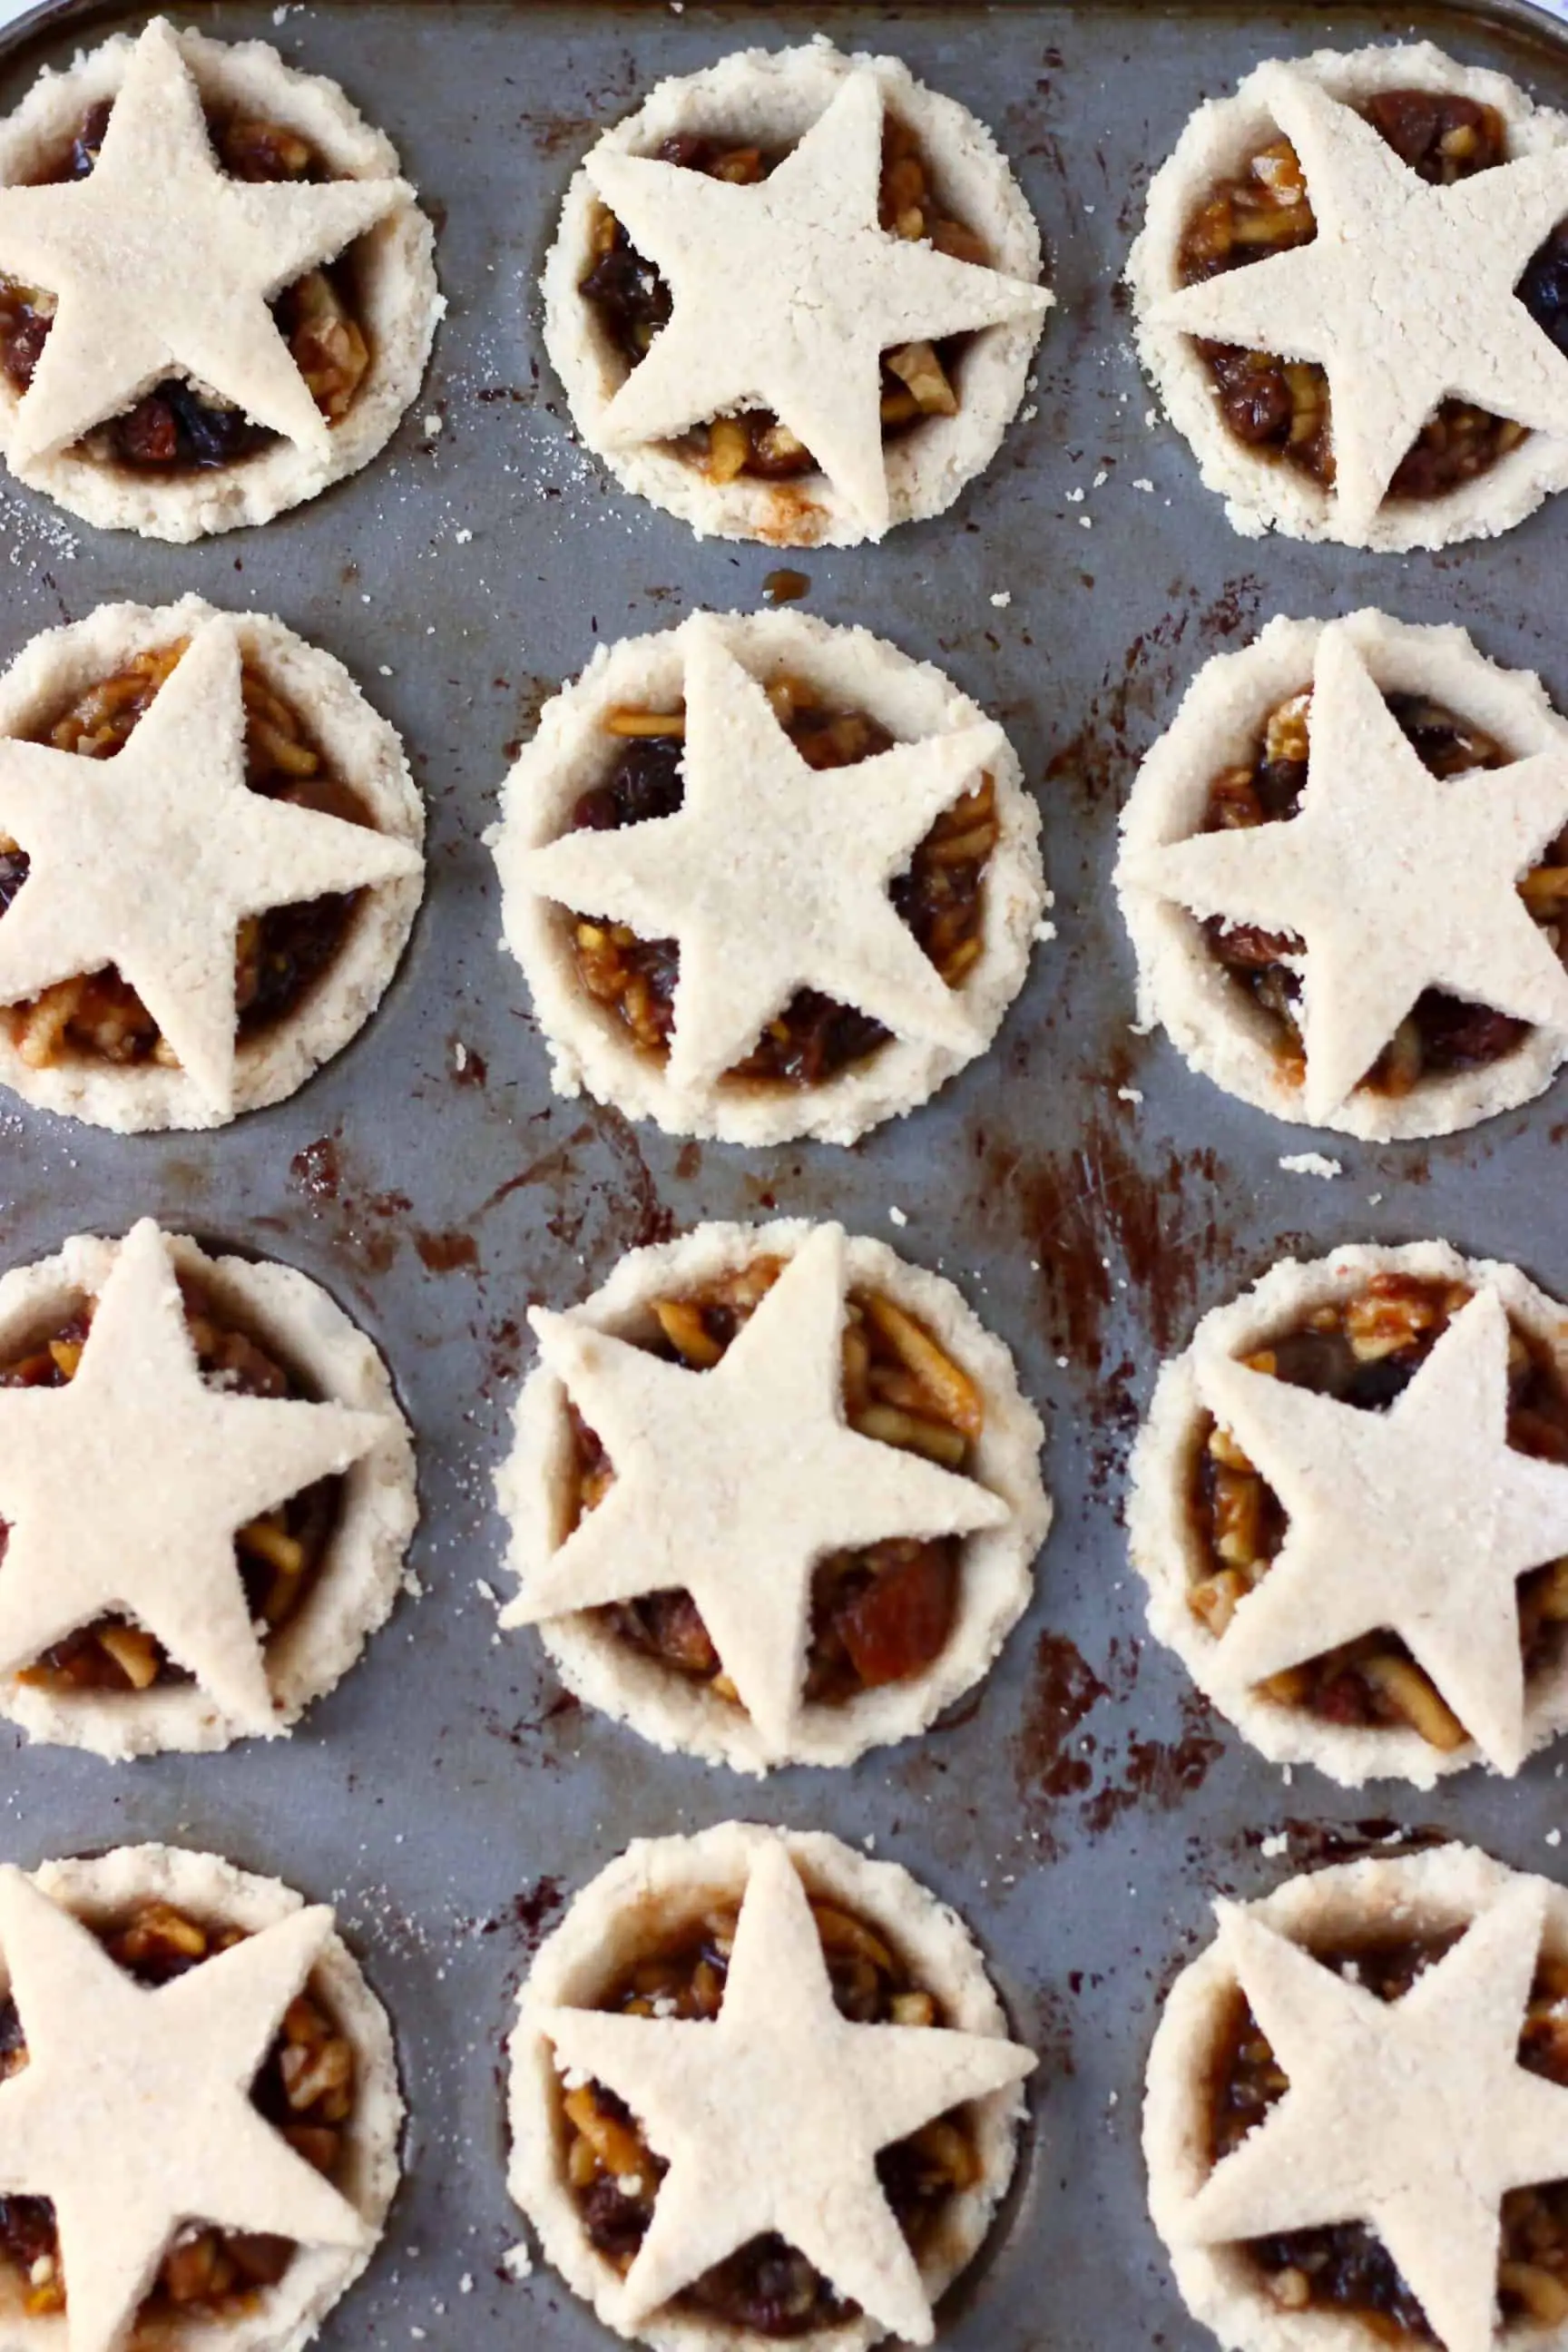 Twelve raw gluten-free vegan mince pies pastry crusts in a muffin tin filled with vegan mincemeat and topped with pastry stars